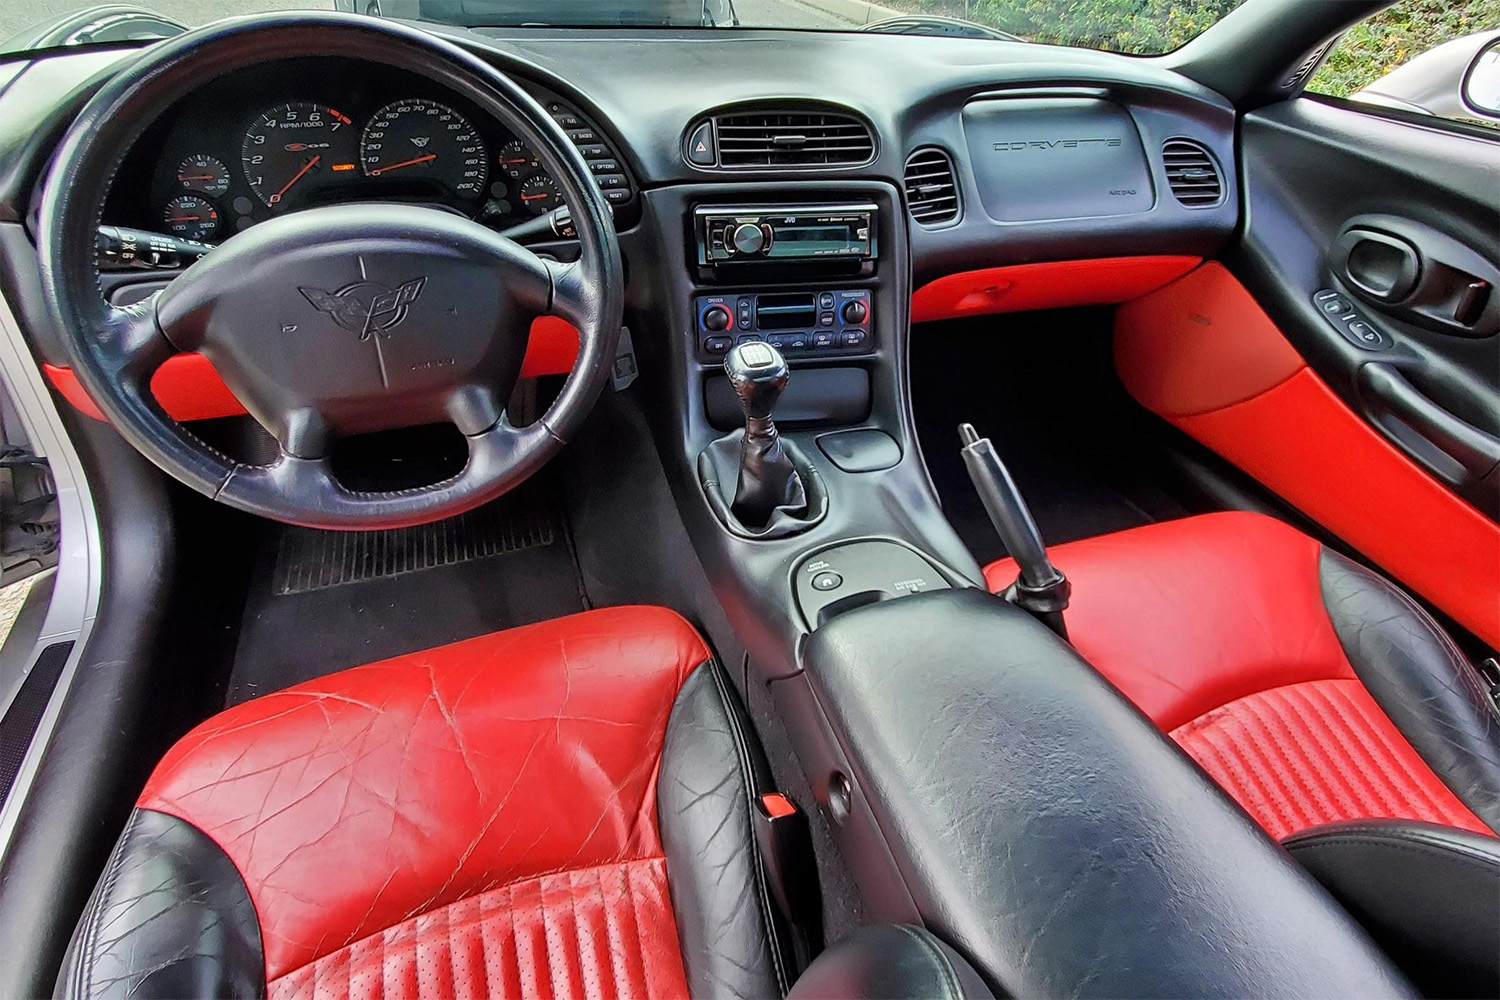 Black and Torch Red leather interior on 2004 Chevrolet Corvette Z06